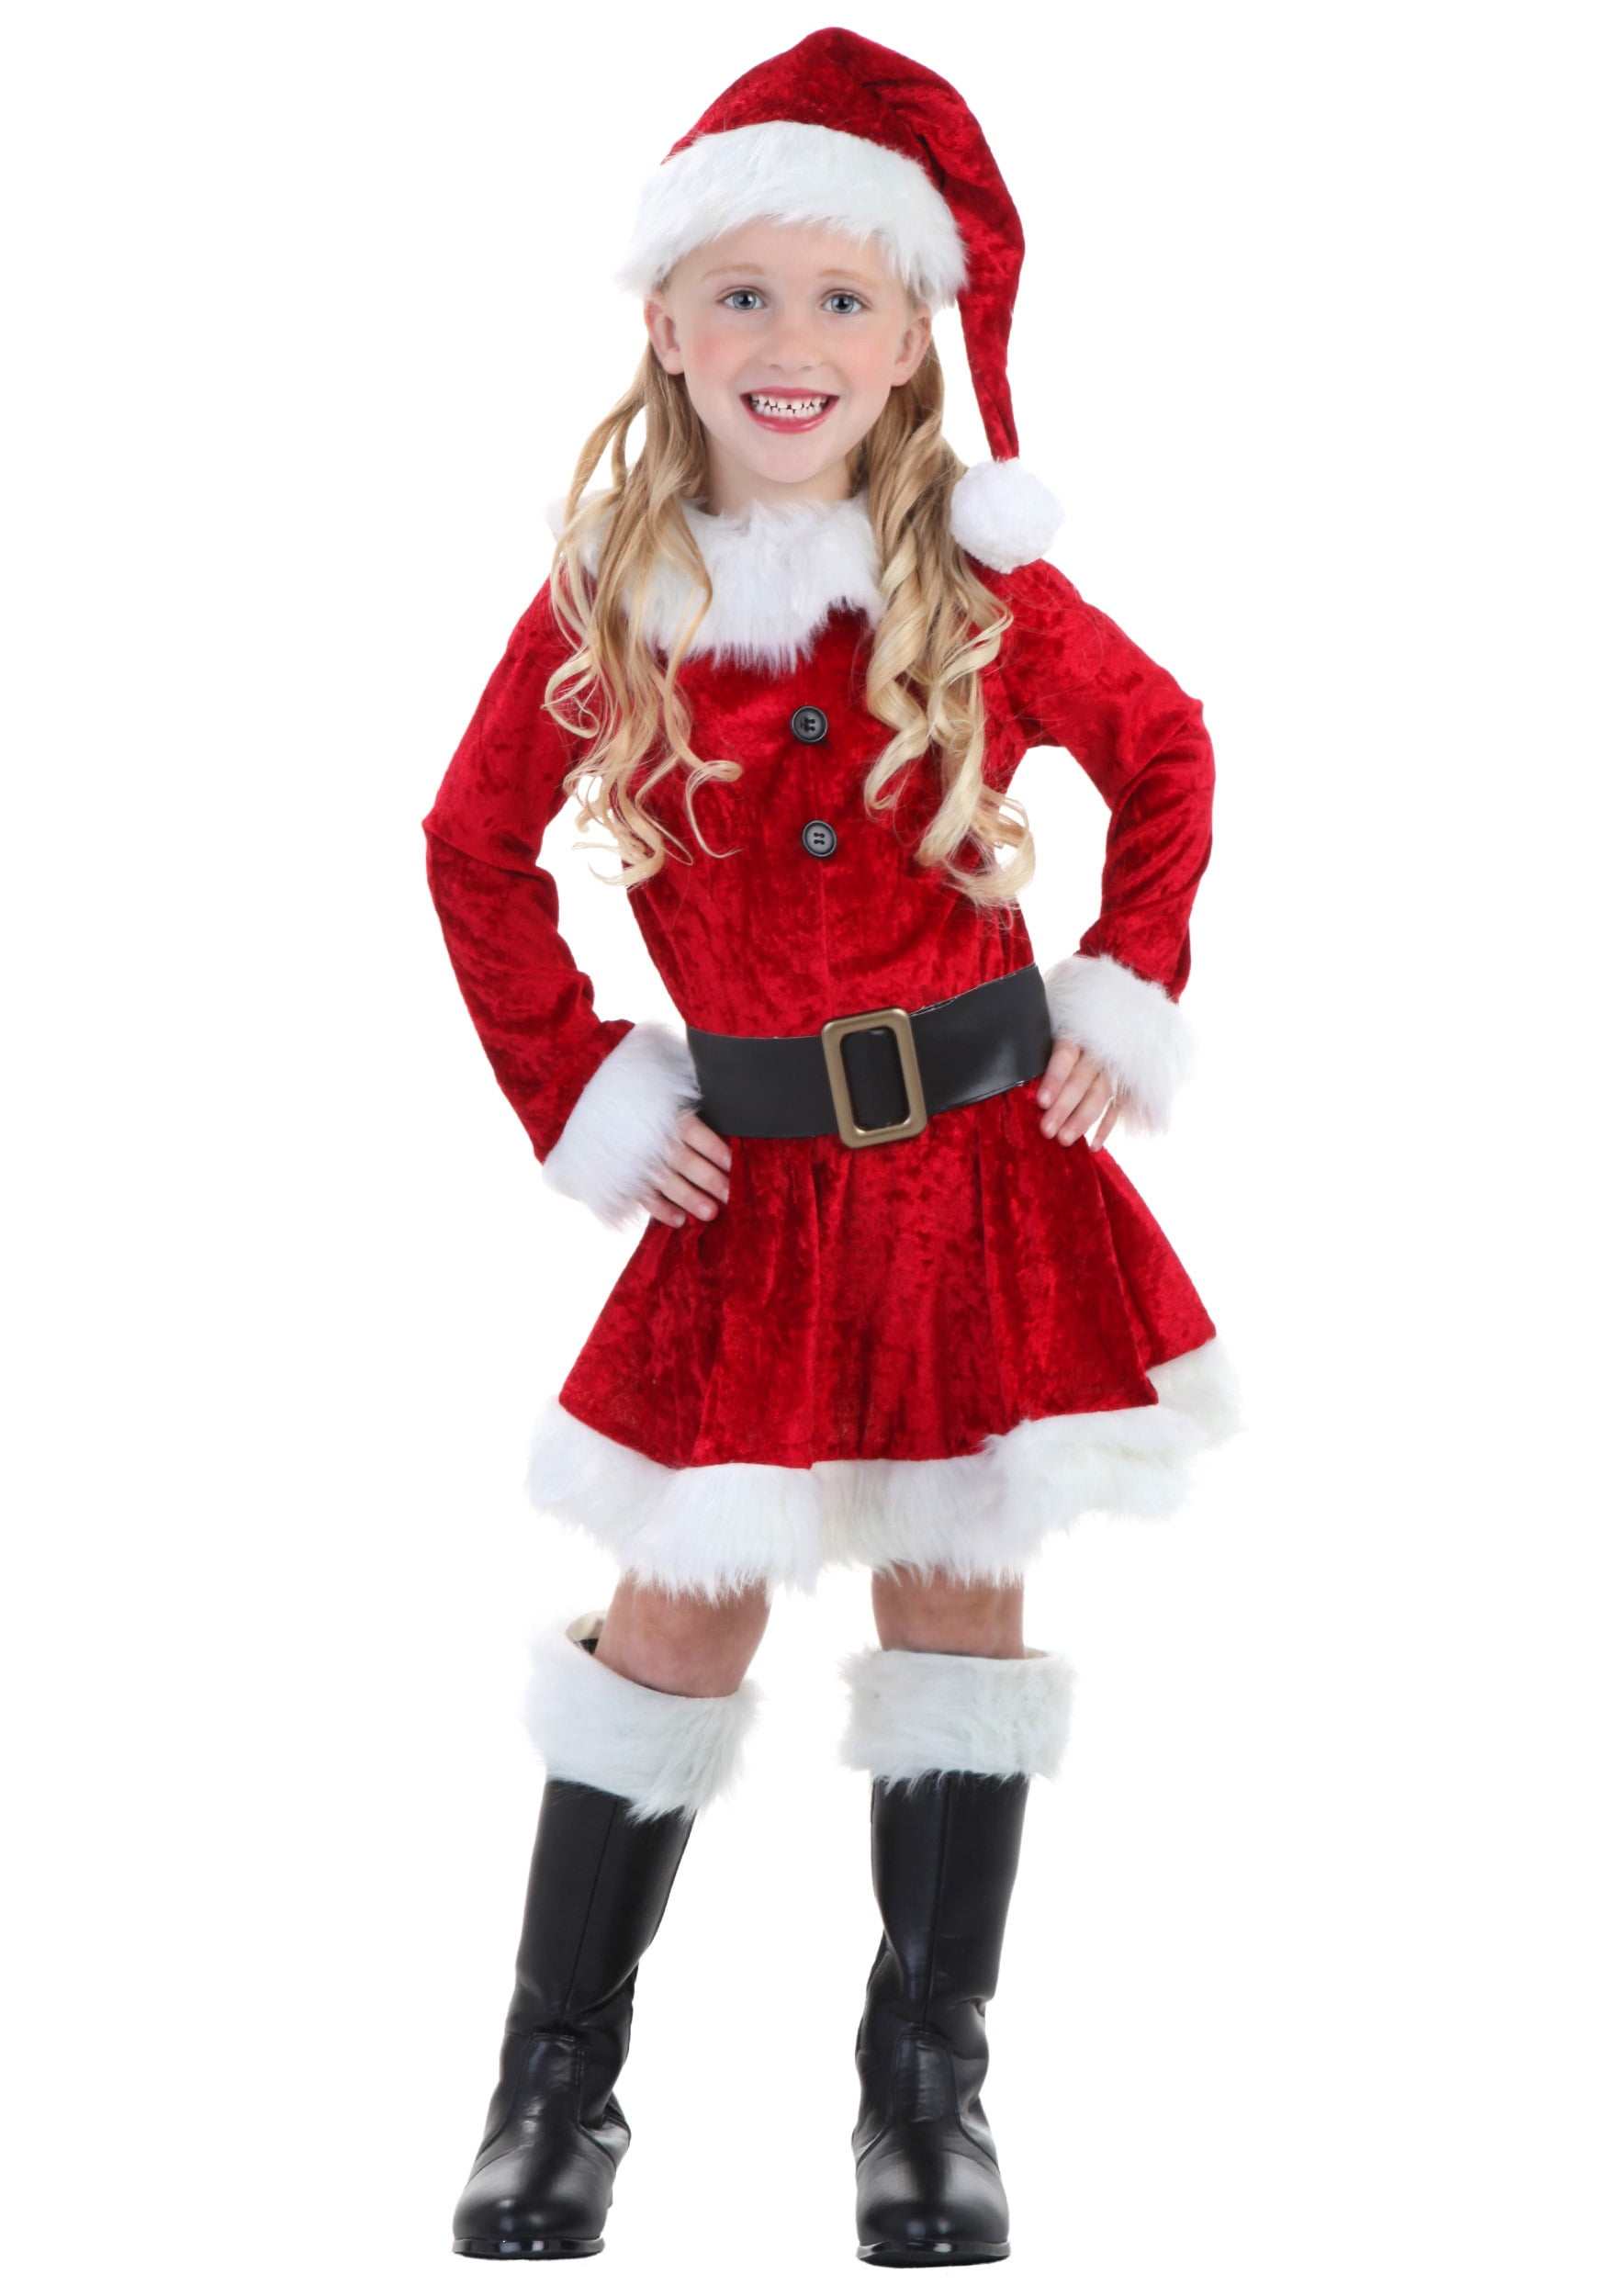 US Girls Christmas Santa Claus Dress Kid Xmas Cosplay Outfit Fancy Party Costume 